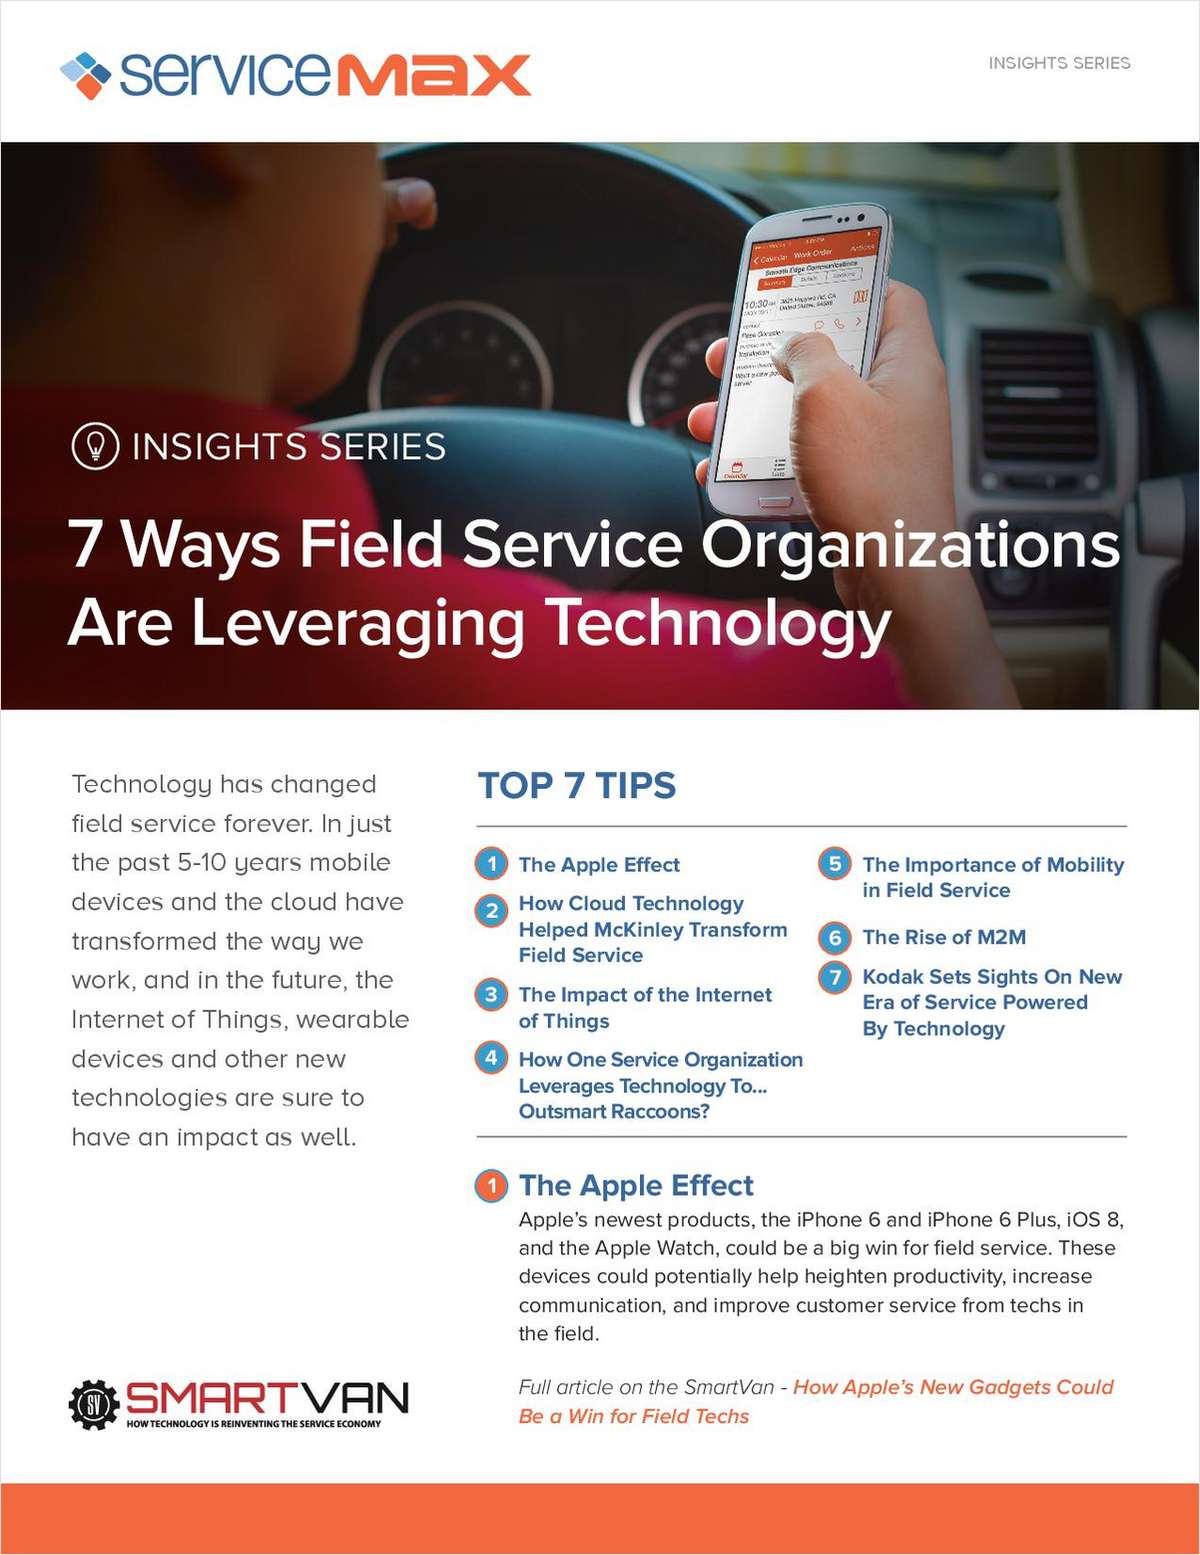 7 Ways Field Service Organizations are Leveraging Technology